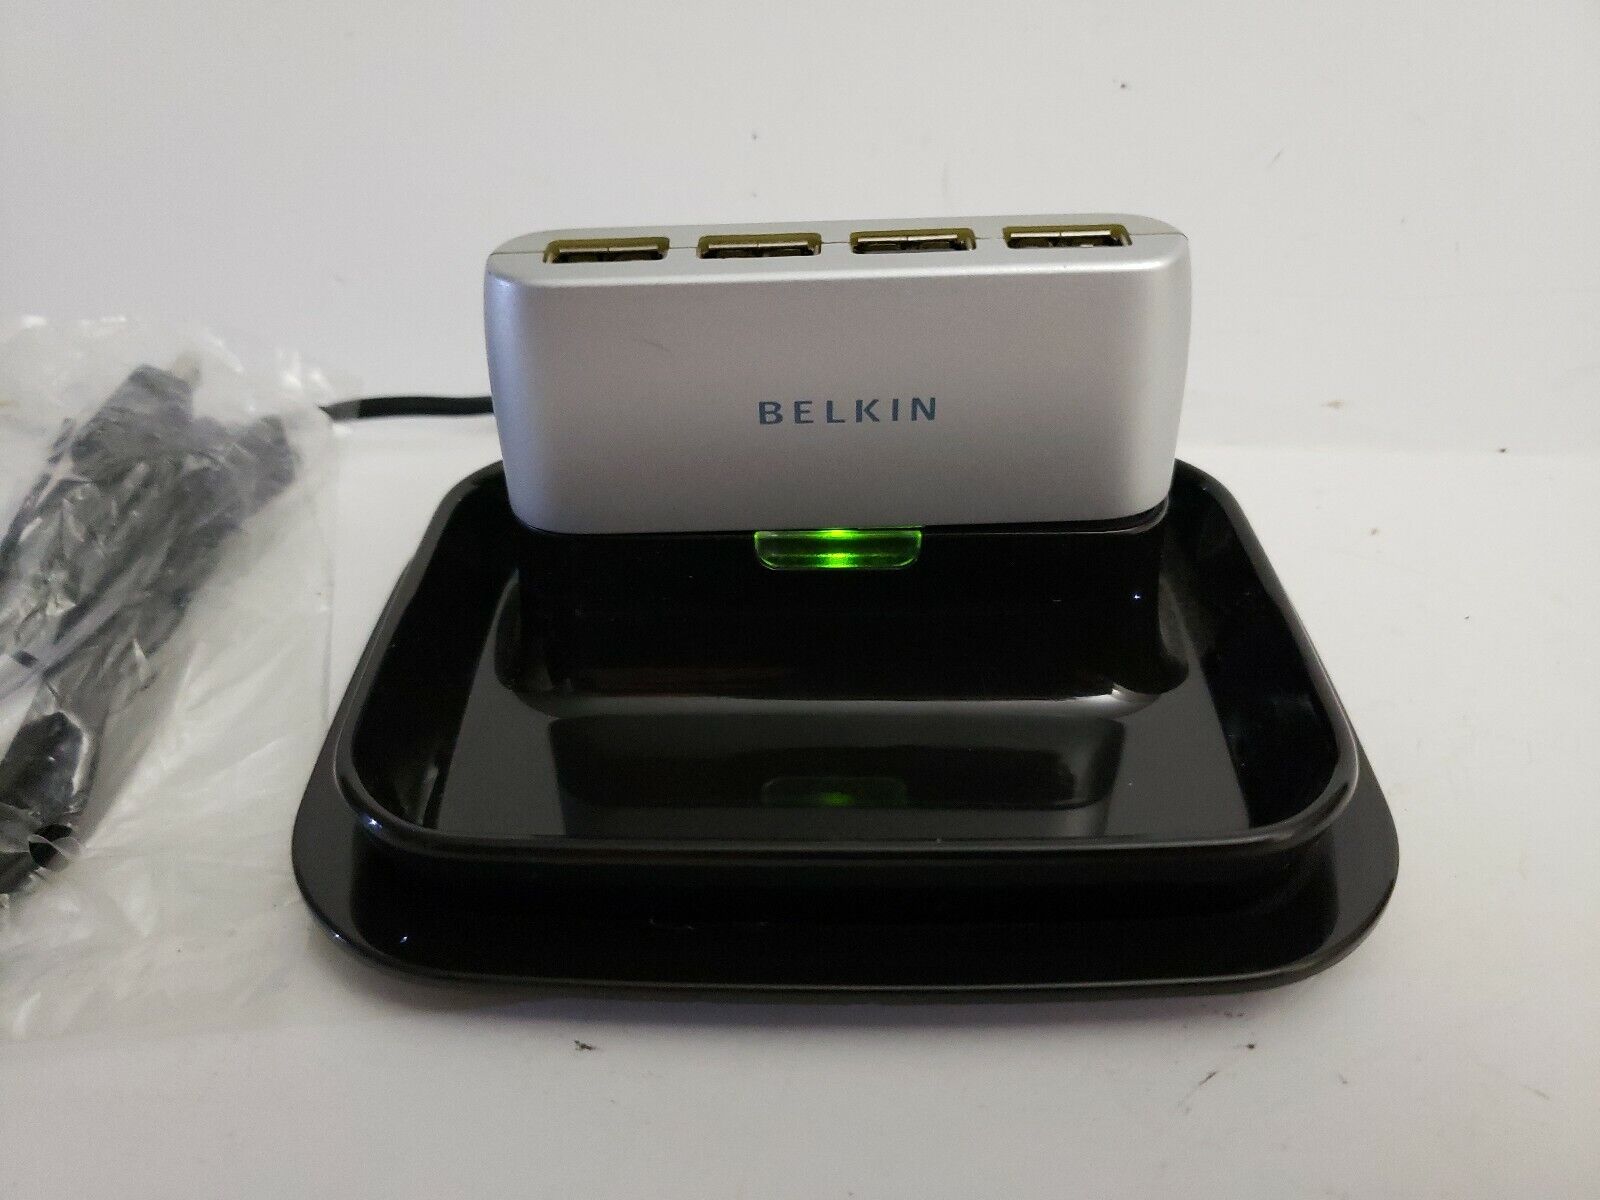 Belkin 7 Port Hub-To-Go Desktop USB Expansion Add On PC and Mac TESTED WORKING